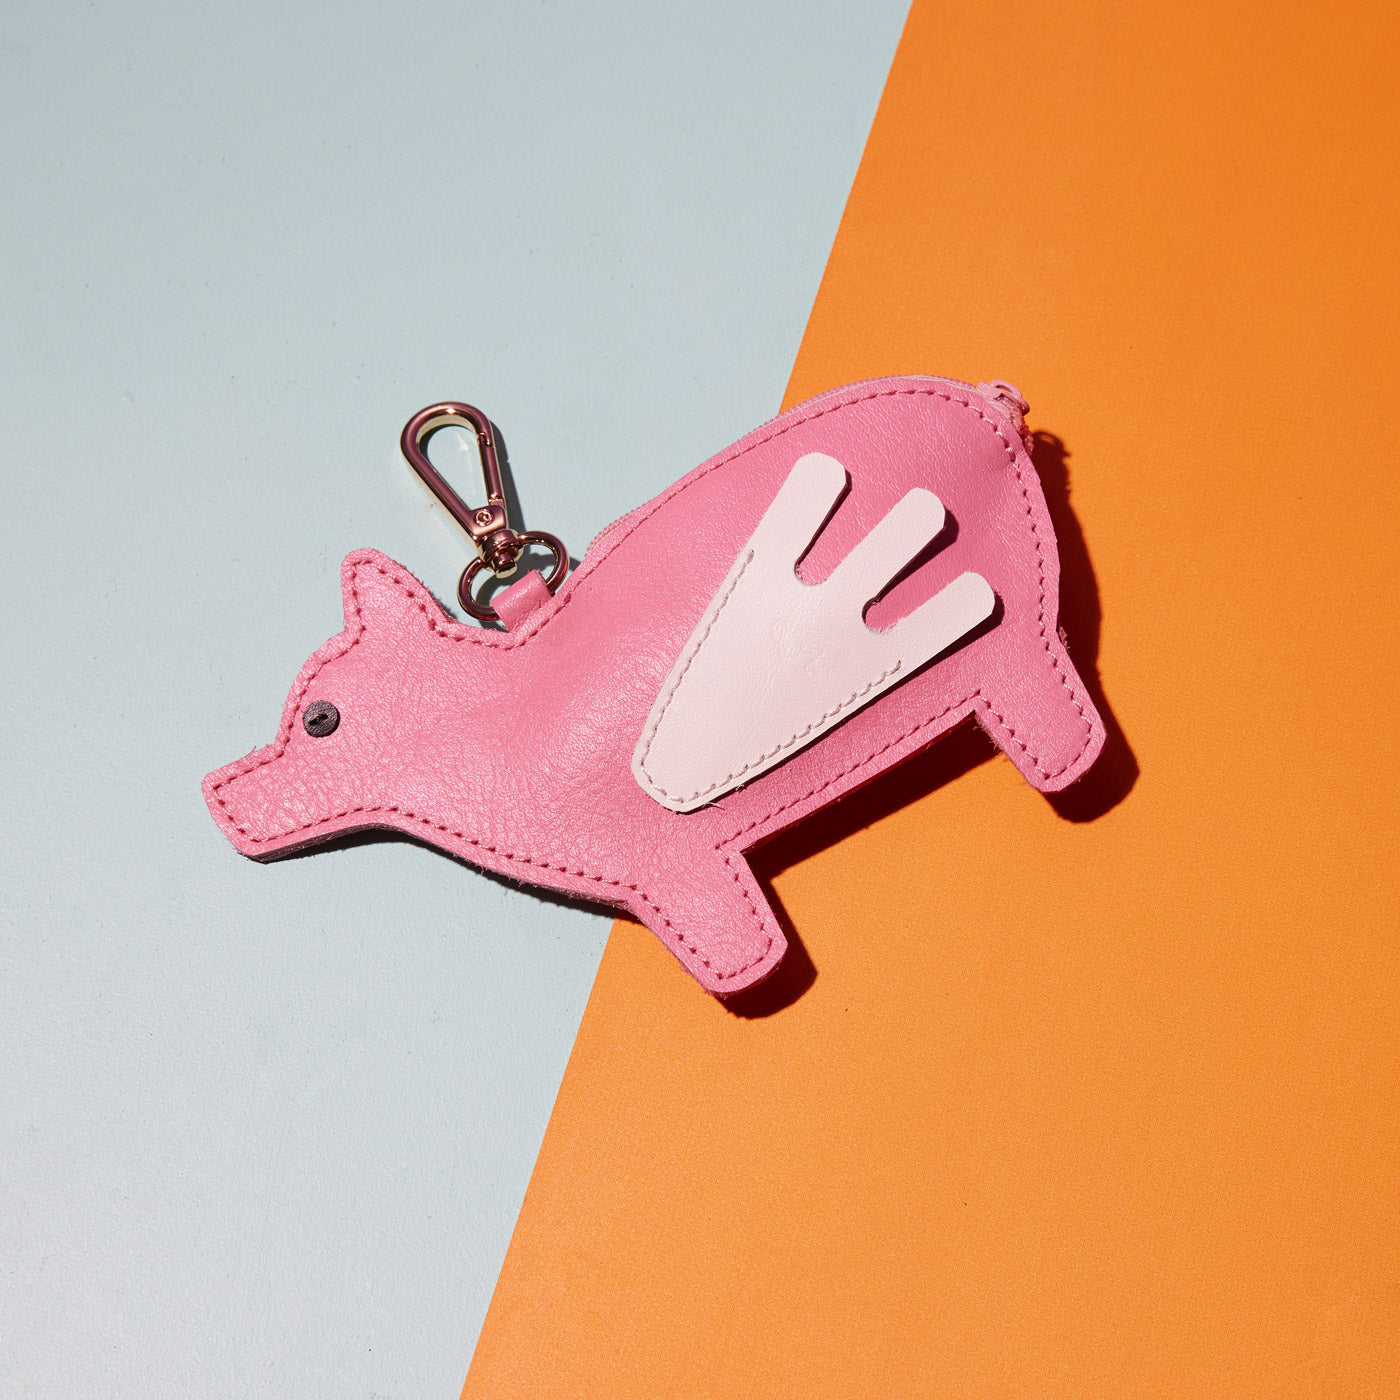 Wicker Darling's Pigasus Jnr. the flying pig coin purse on a colourful background